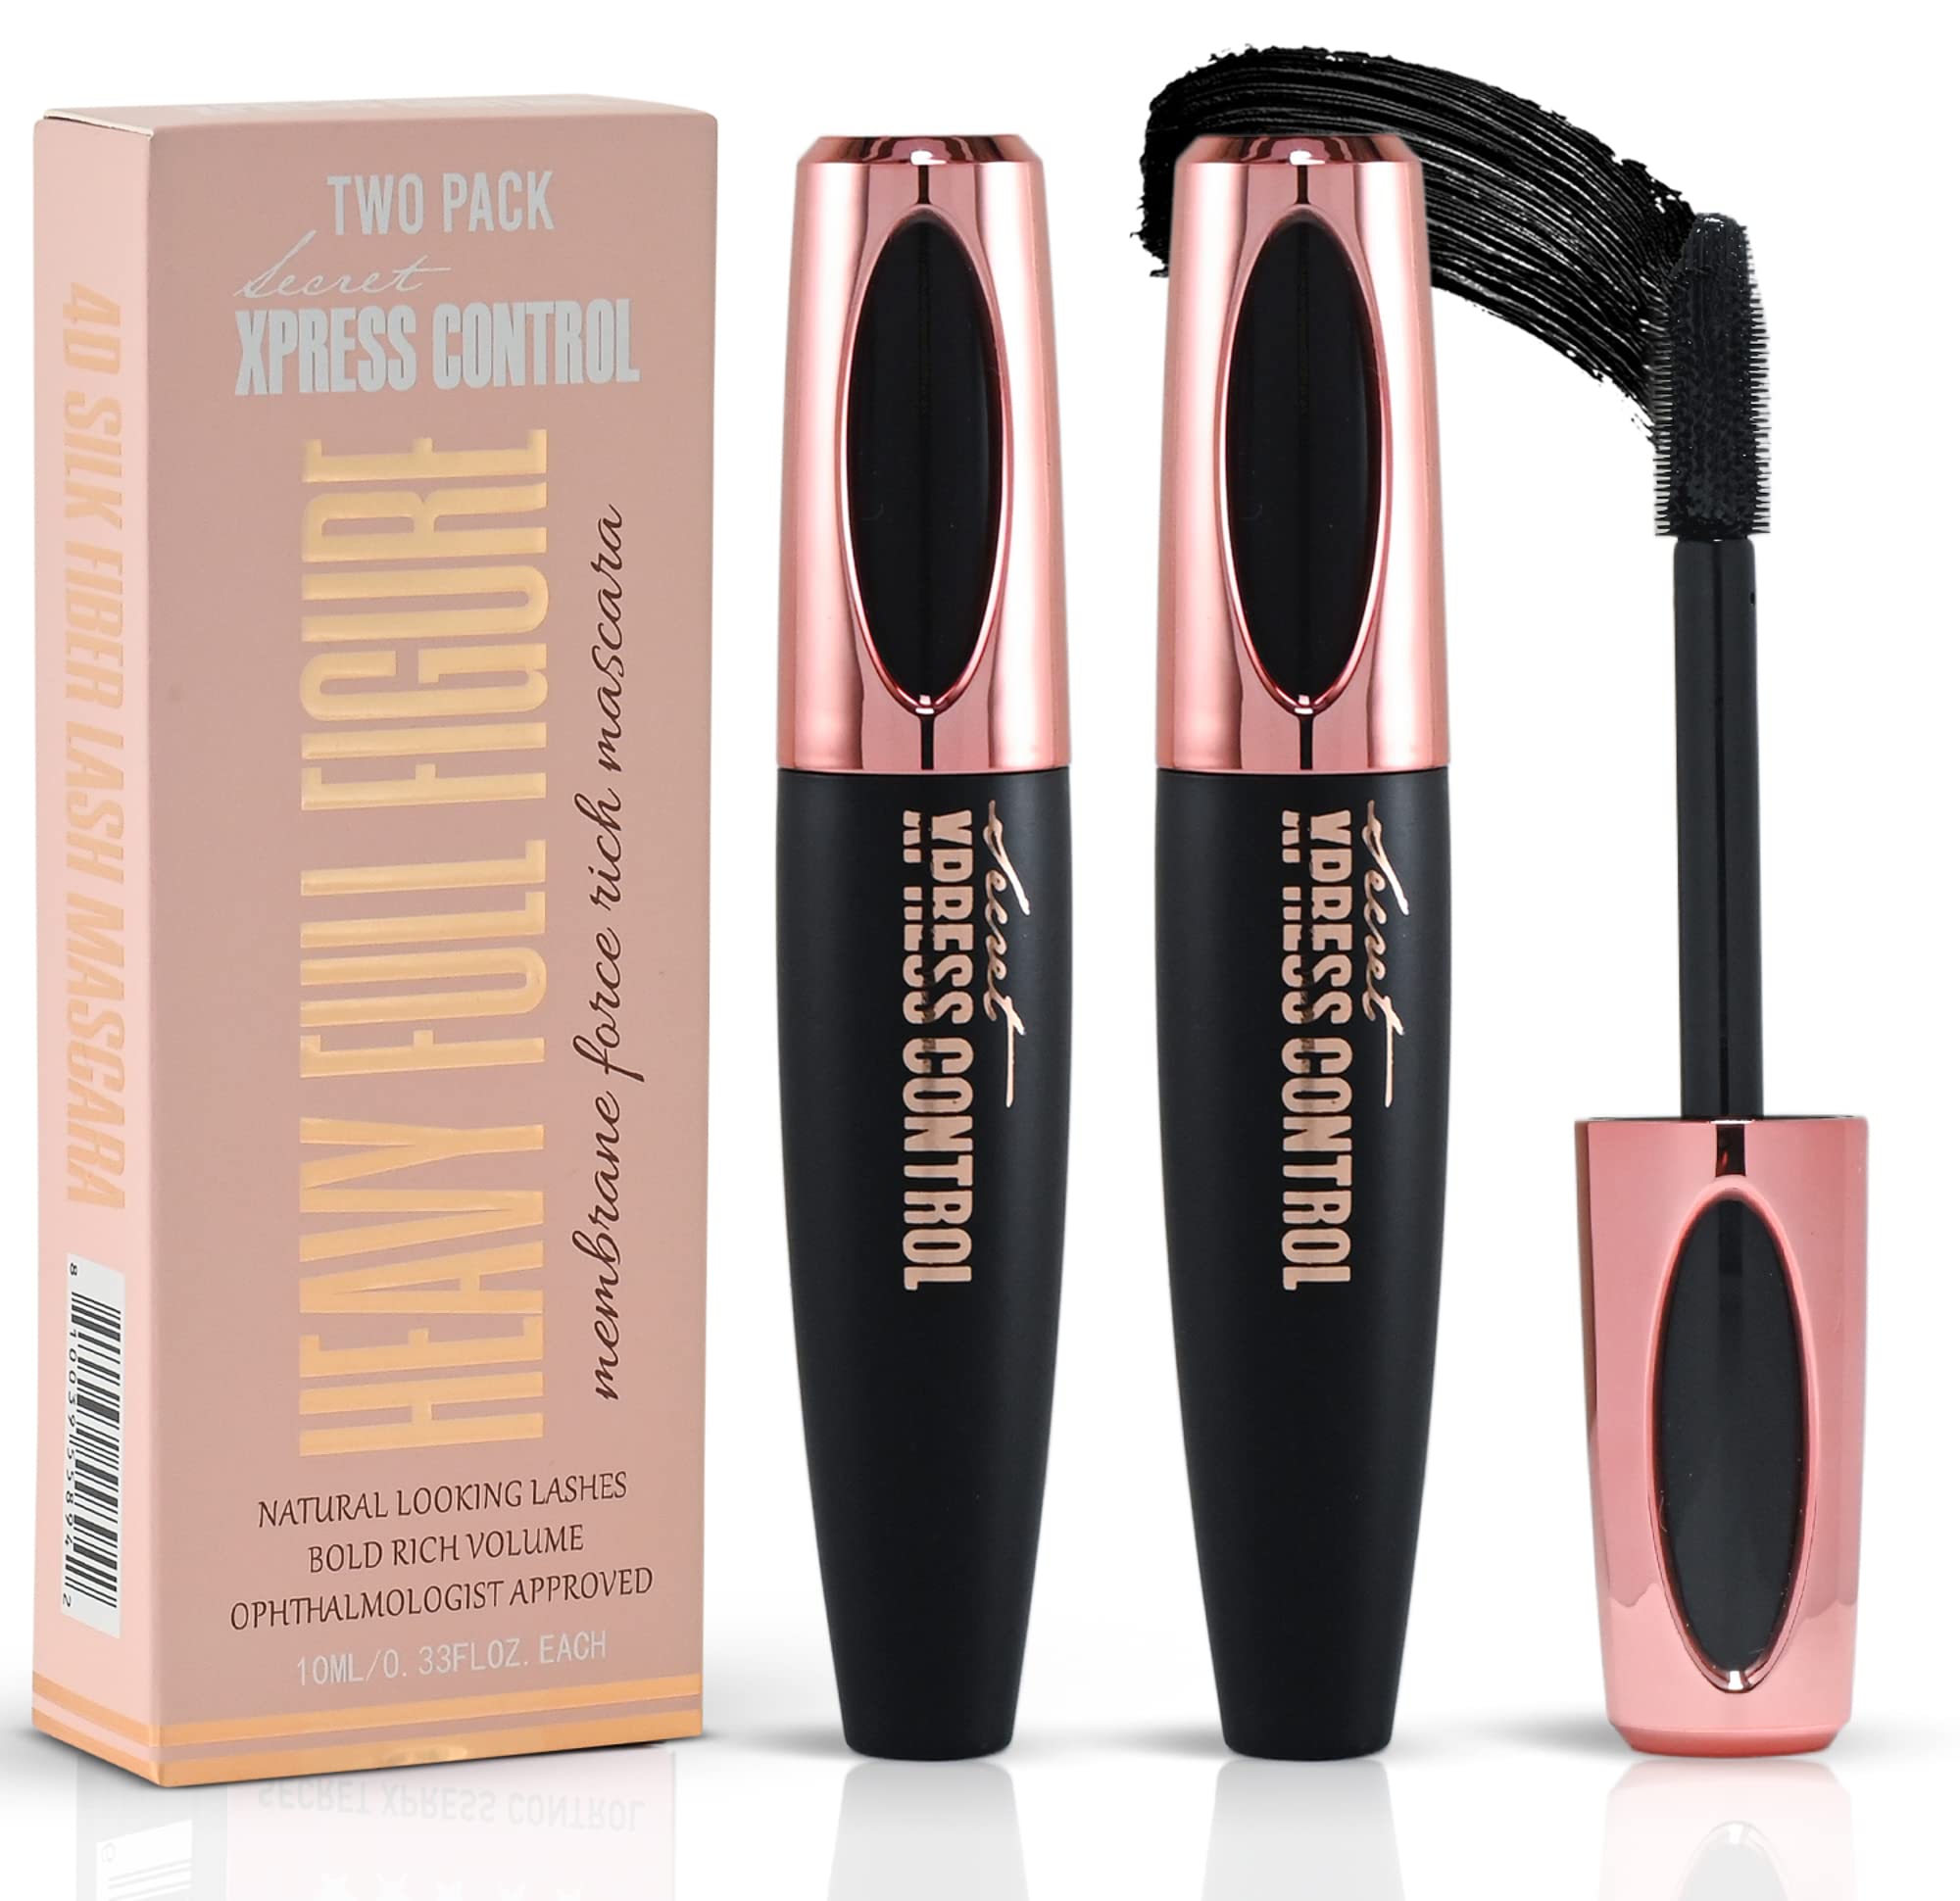 Secret Xpress Control 4D Silk Fiber Lash Mascara, Lengthening and Thick, Long Lasting, Waterproof & Smudge-Proof, All Day Exquisitely Full, Long, Thick, Smudge-Proof Eyelashes (2 Pack)